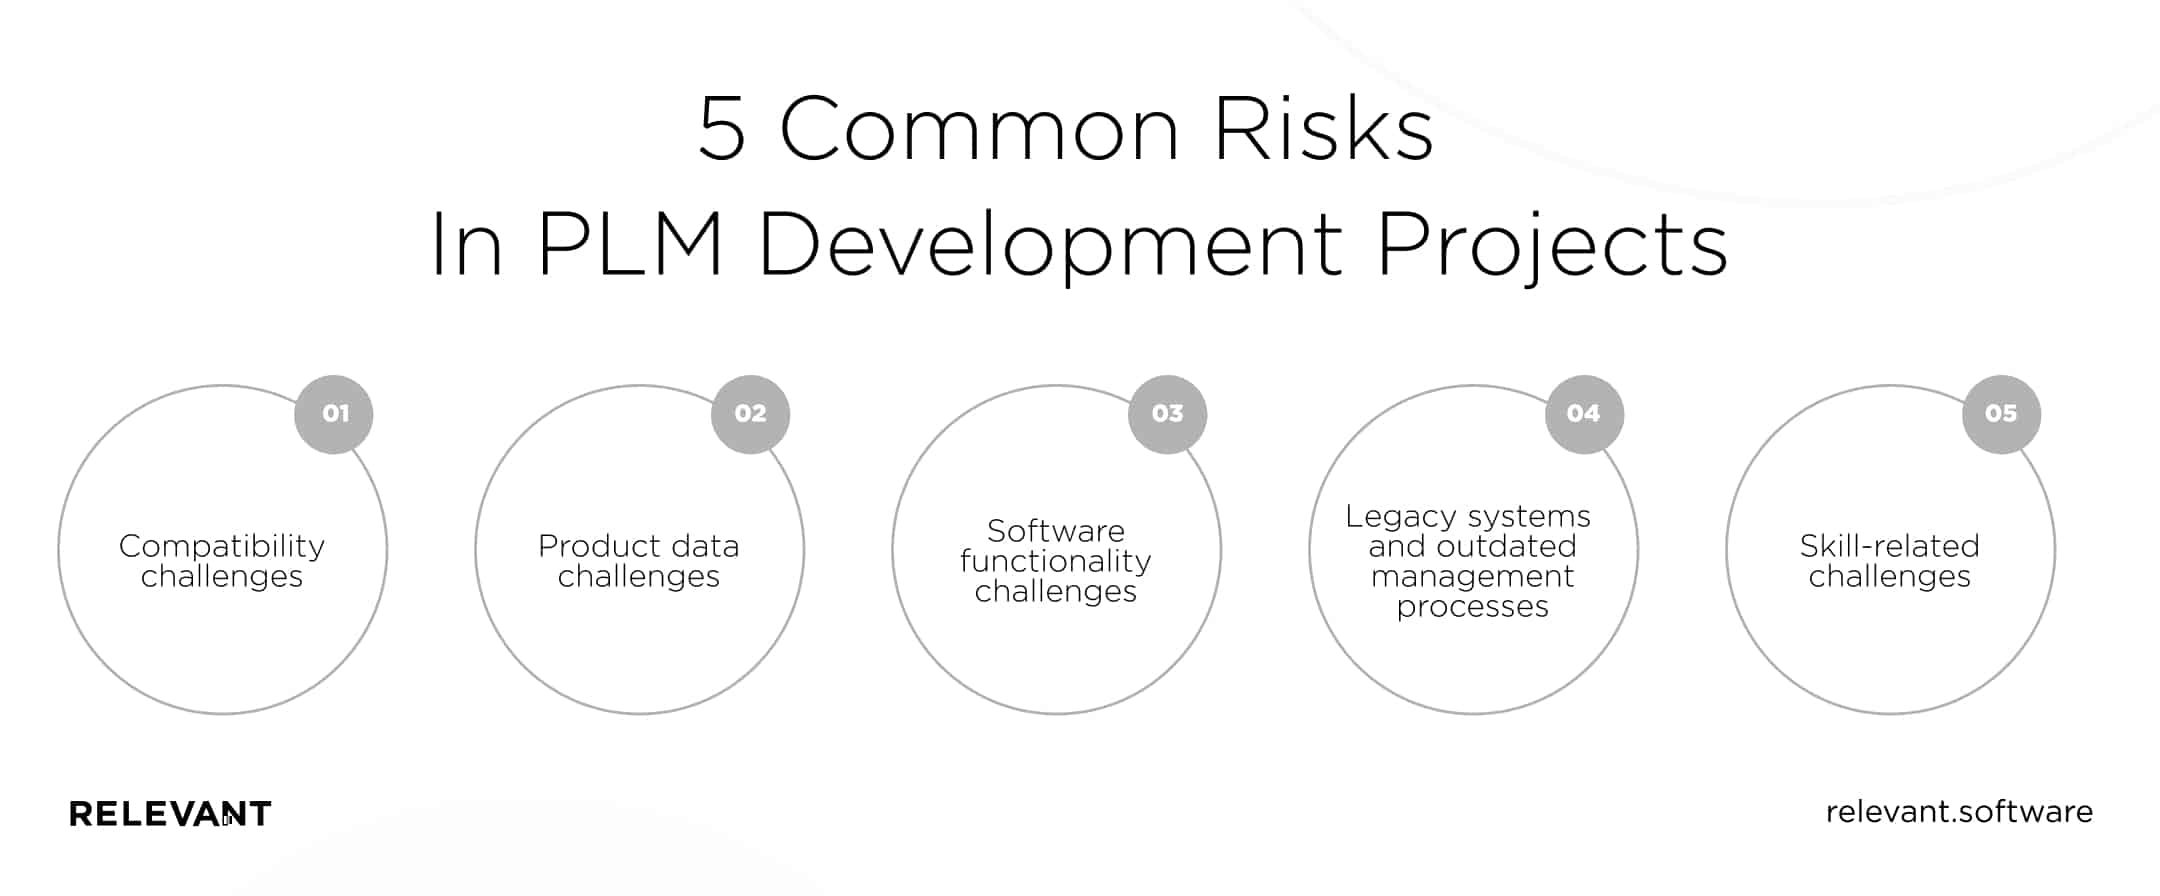 5 Common Risks In PLM Development Projects